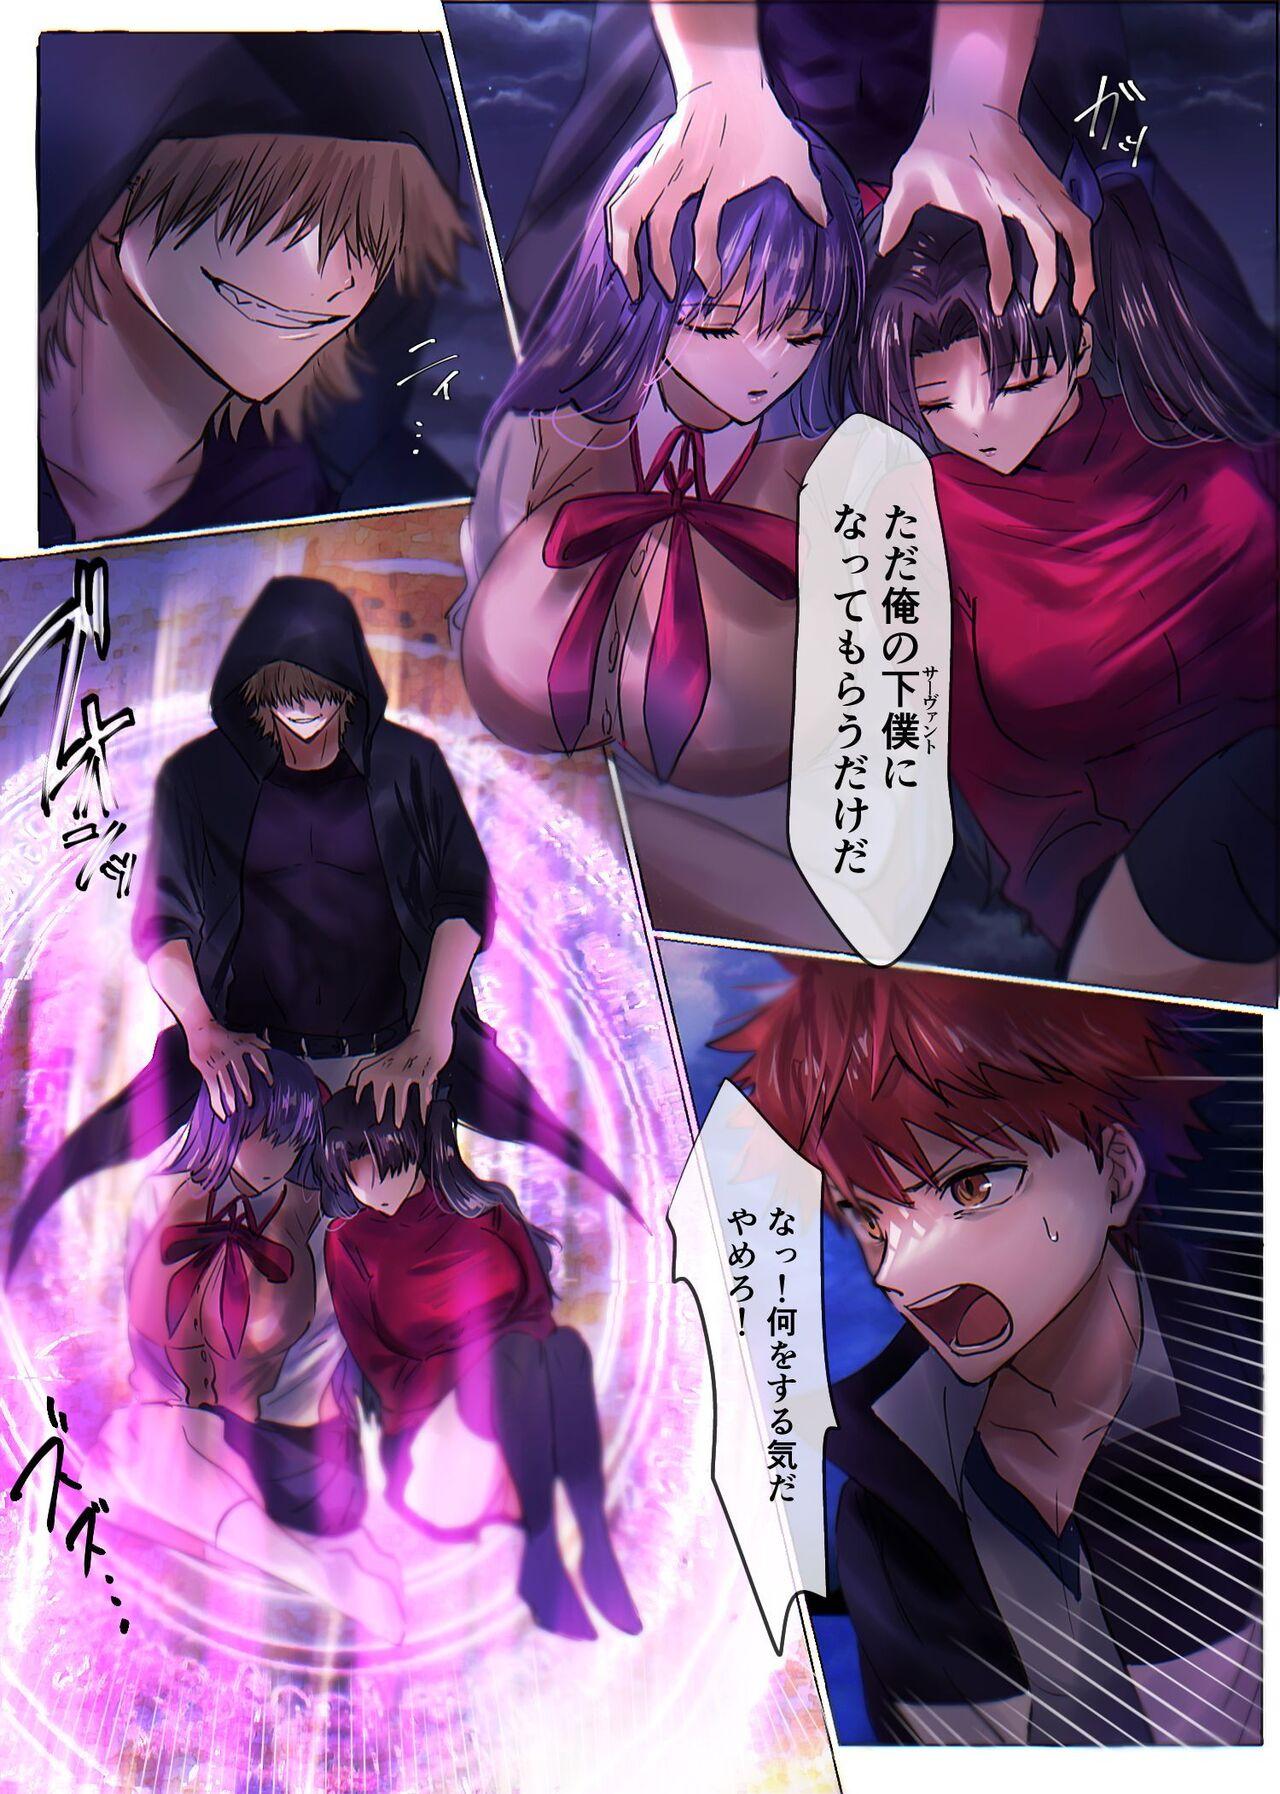 Gay 3some Fate/rewrite ～凛と桜がサーヴァント化洗脳される本～ - Fate grand order Cams - Page 3